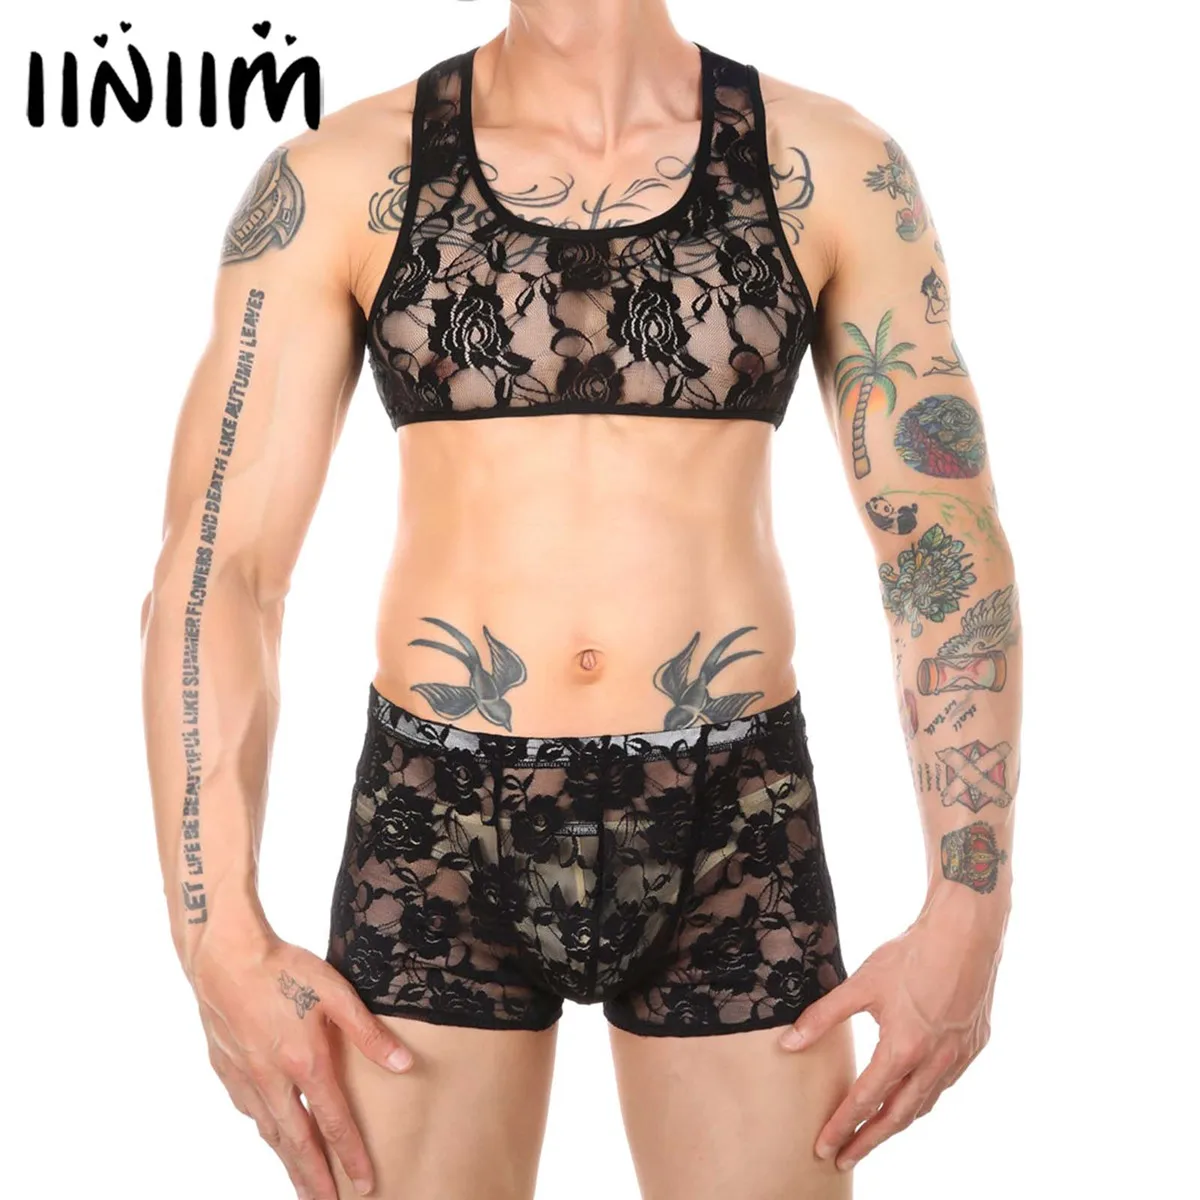 

Sissy Men Exotic Set Flower Pattern See-Through Lace Lingerie Nightwear Sleeveless Cropped Tank Top with Elastic Shorts Boxer